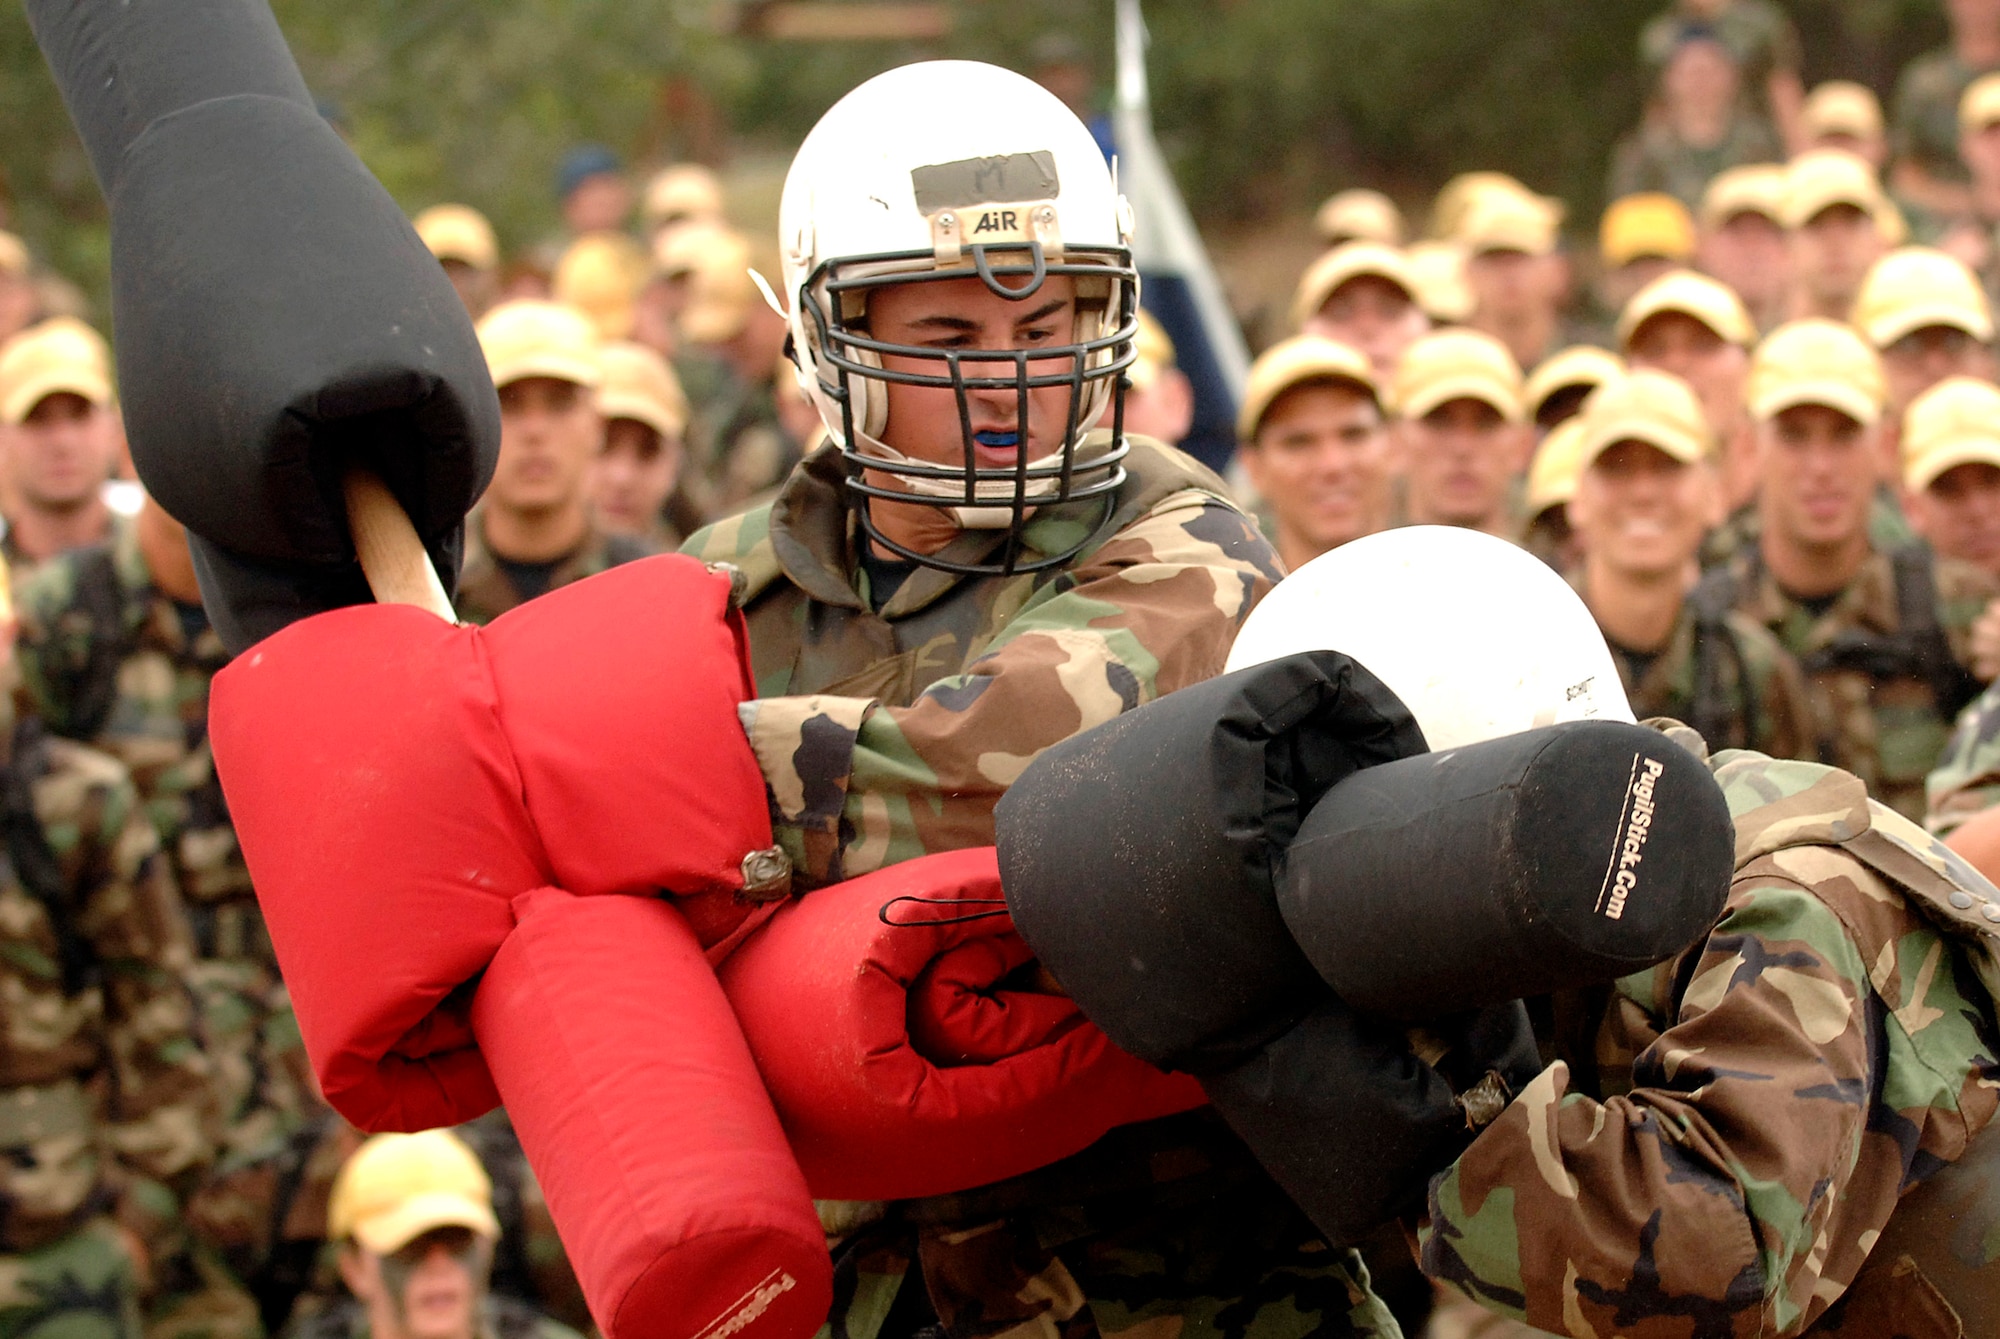 Academy basic cadet trainees Griffin Biscone (left) and Lawrance Franklin battle it out July 28 at the U.S. Air Force Academy, Colo., for the title of "Big Bad Basic," a single-elimination tournament where cadets battle one another with pugil sticks. Cadet Biscone went on to win the title in front of 1,200 of his peers. (U.S. Air Force photo/Mike Kaplan)